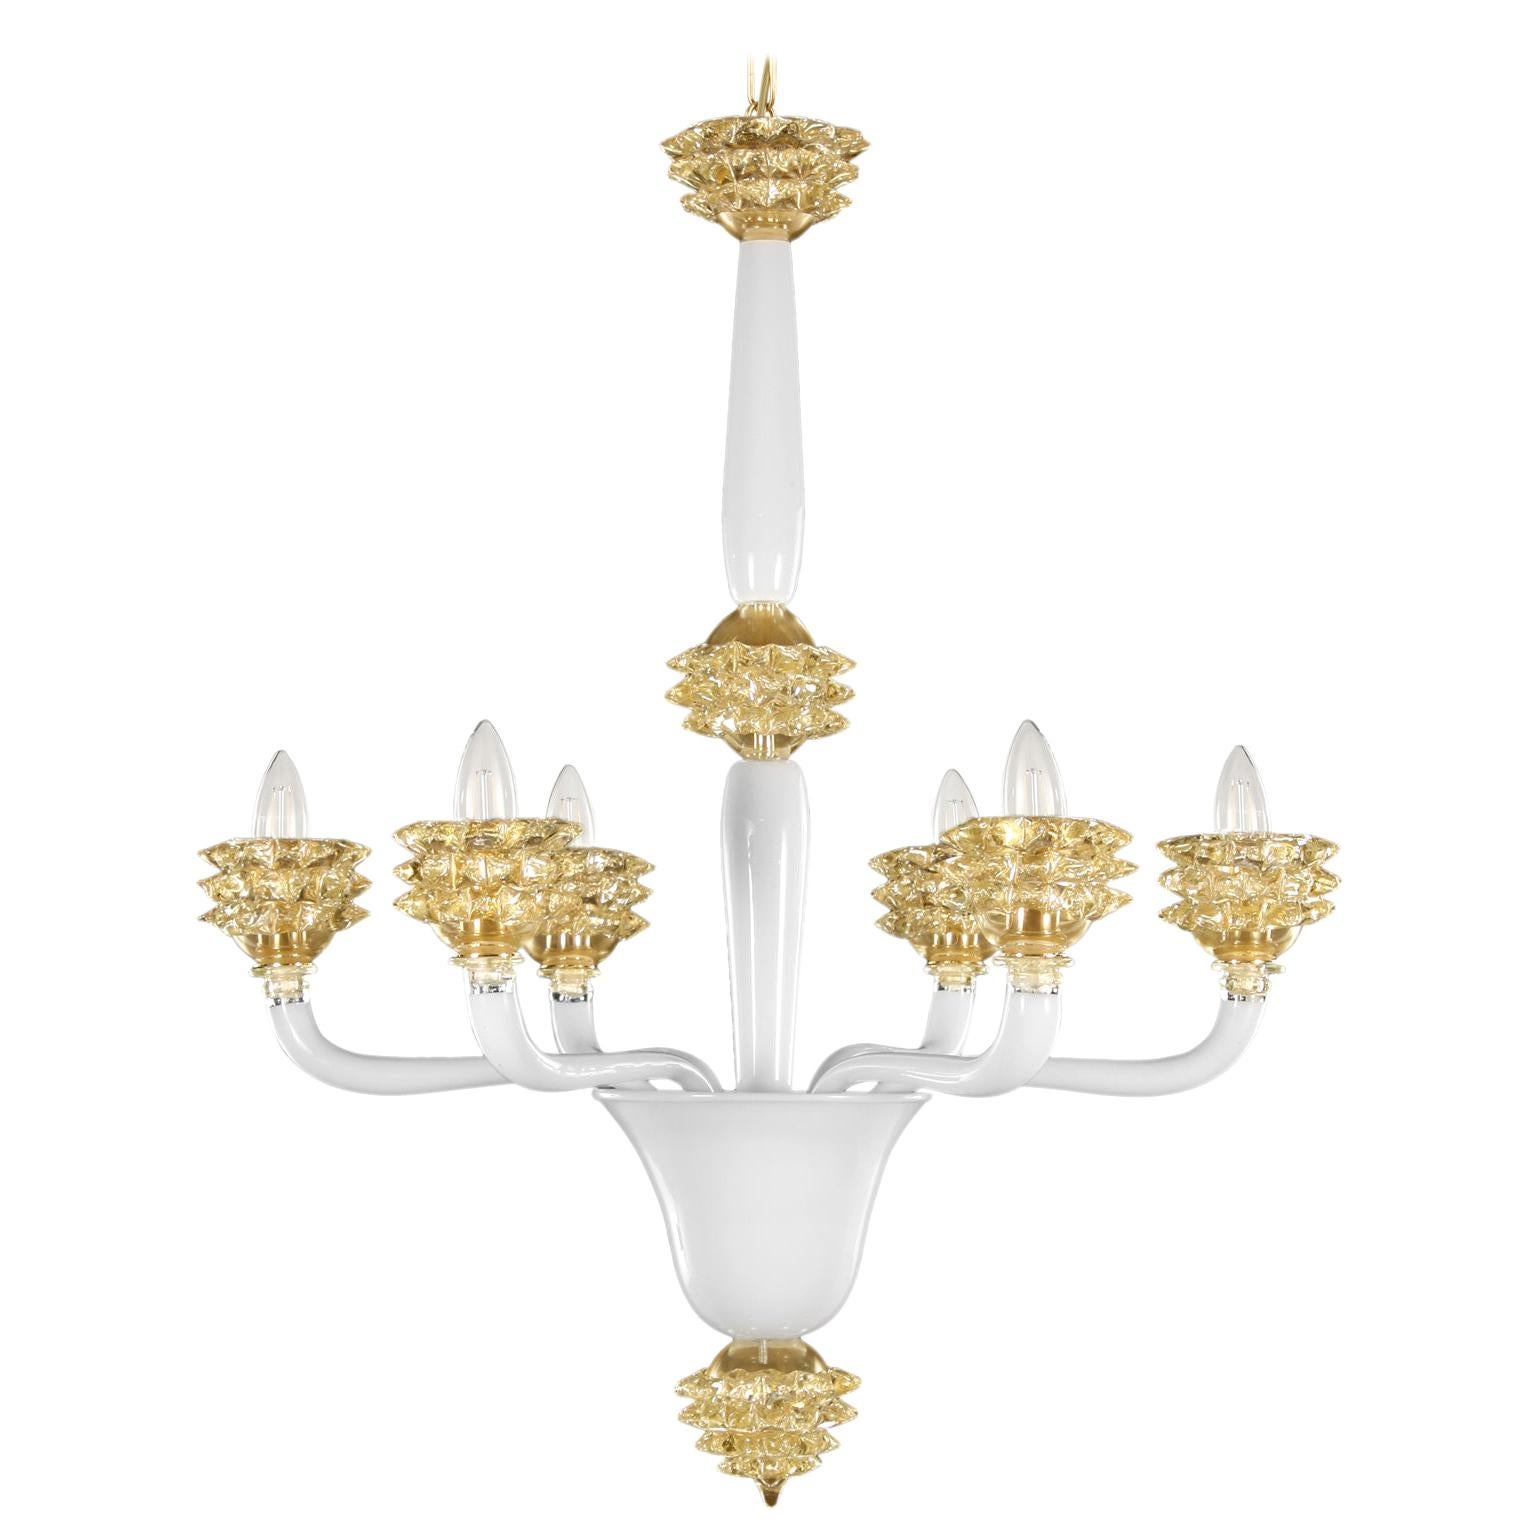 Chandelier 6 arms White Encased Murano Glass Gold Rostri details by Multiforme